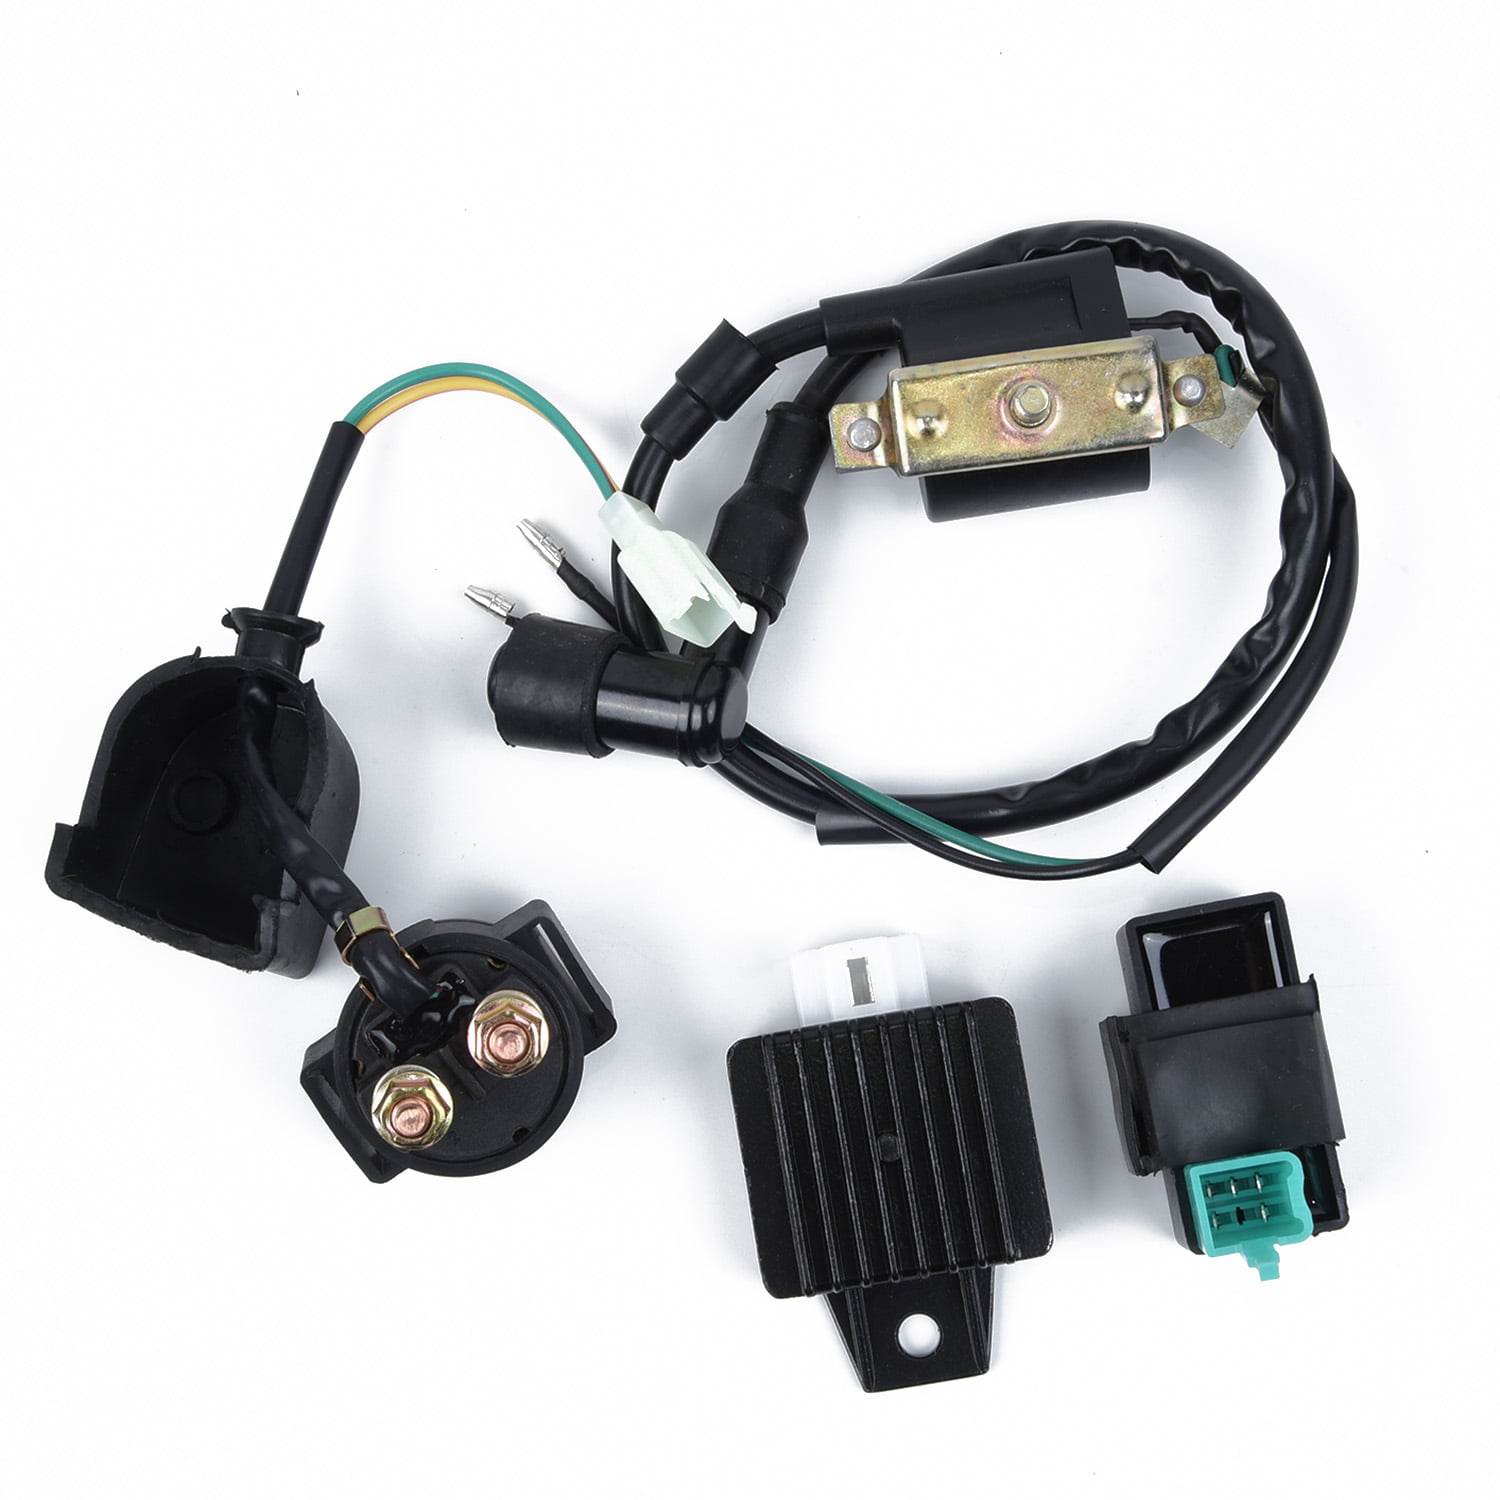 Chanoc CDI Ignition Coil Solenoid Relay Voltage Regulator for 50cc 70cc 90cc 110cc 125cc Chinese ATV Dirt Bike Moped Go Kart